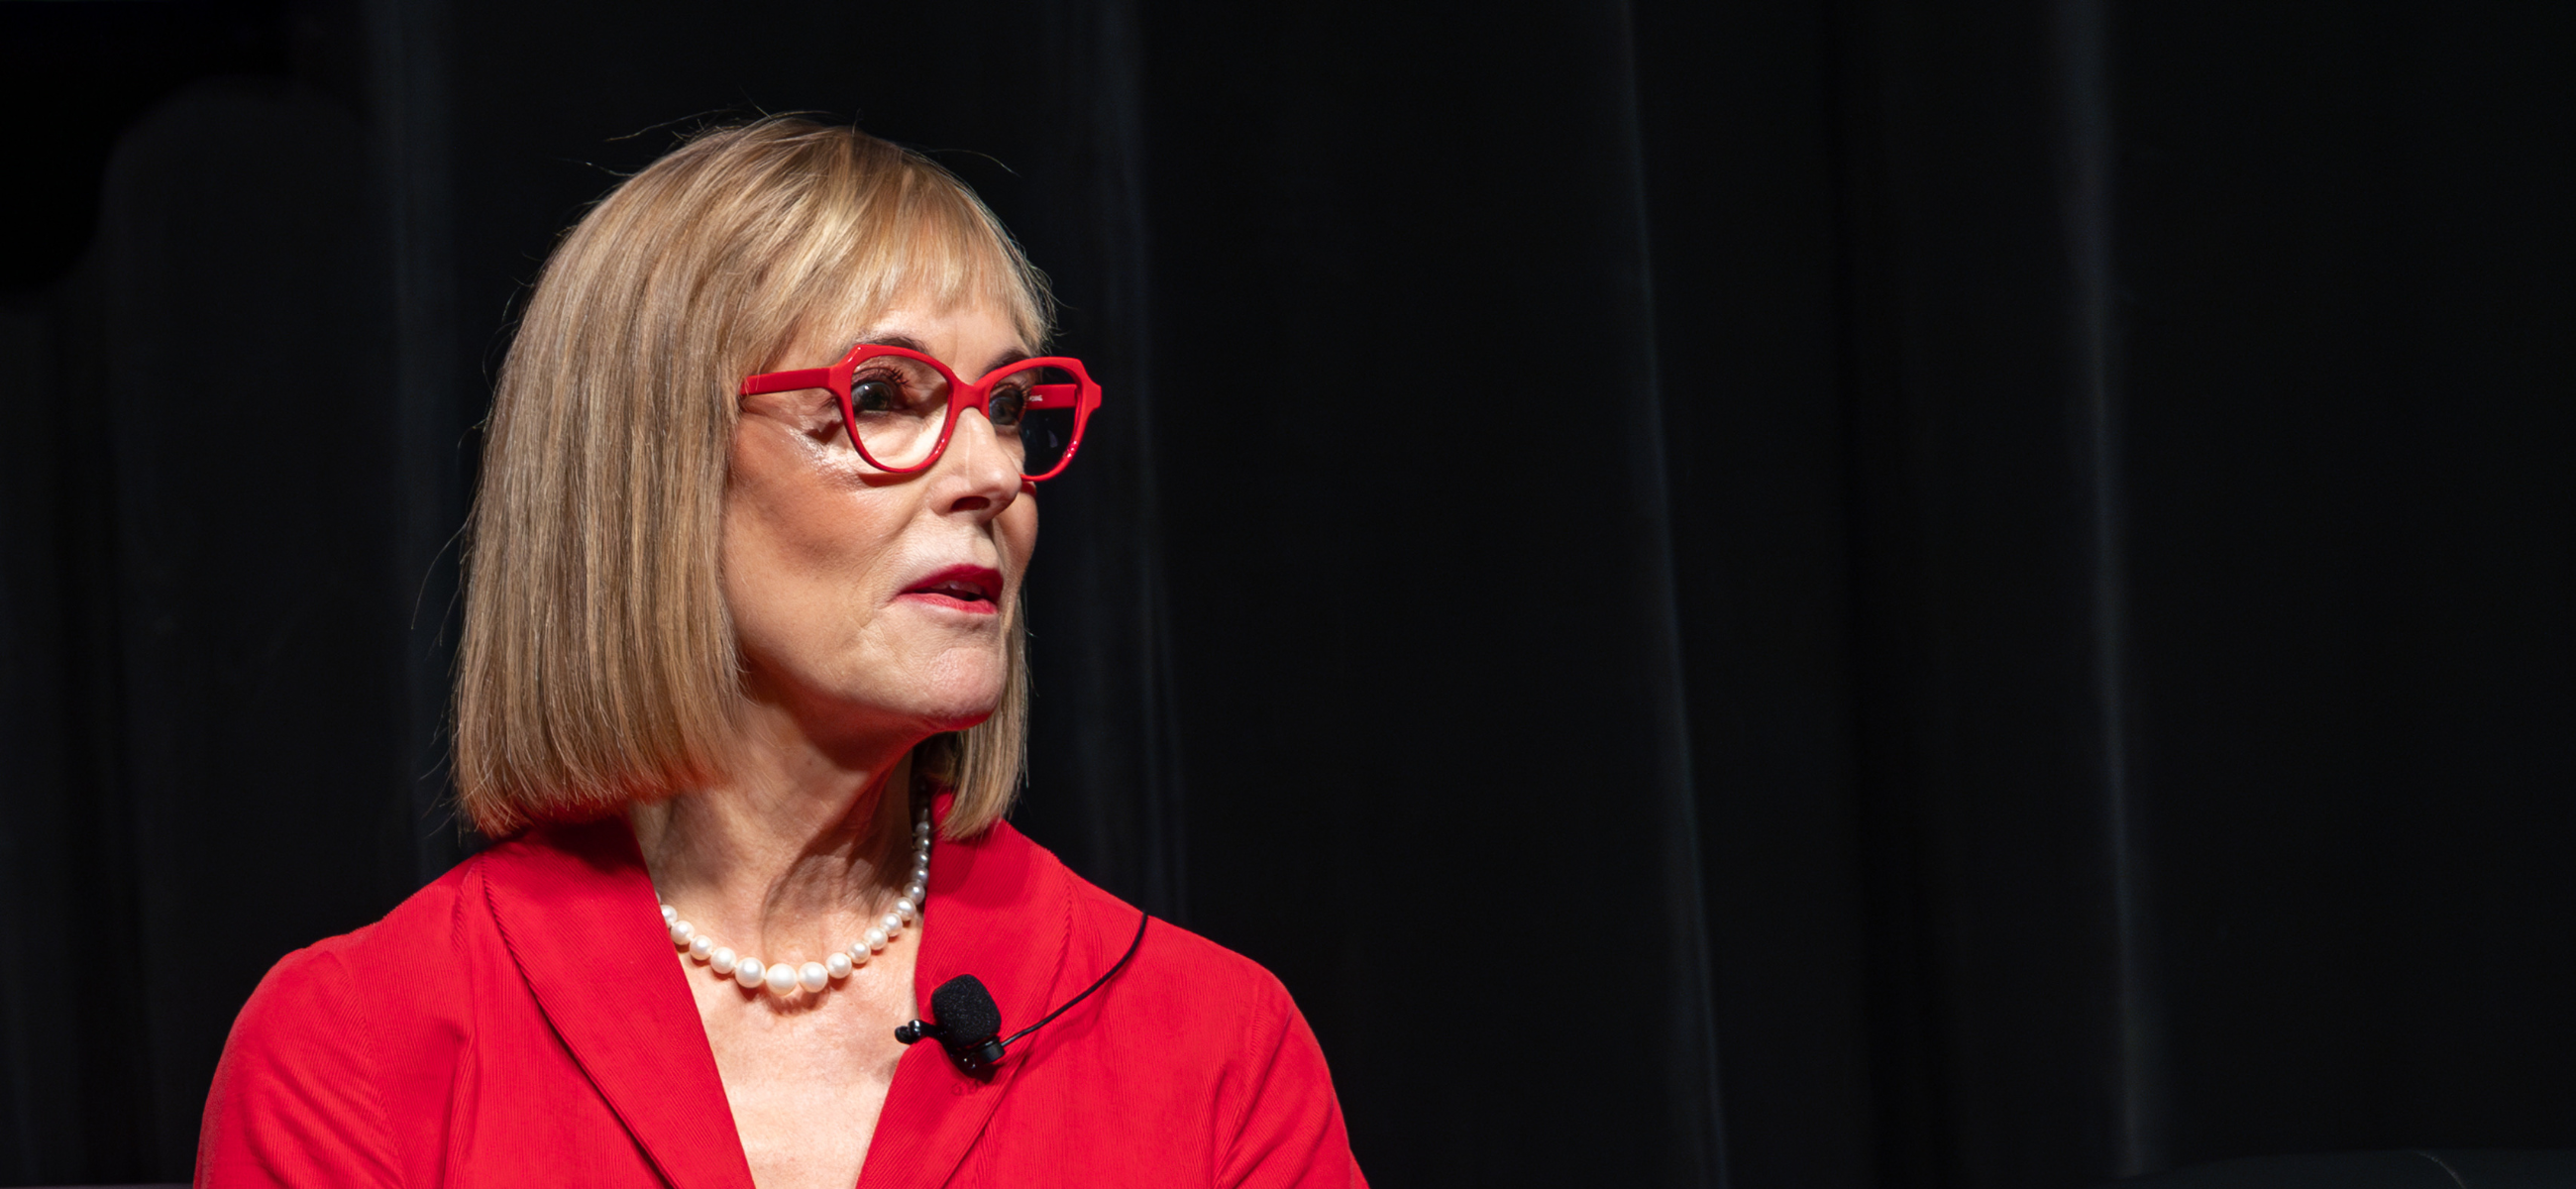 Lt. Gov. Suzanne Crouch participates in the gubernatorial candidates panel at Dentons Legislative Conference. (Credit: Mark Curry)